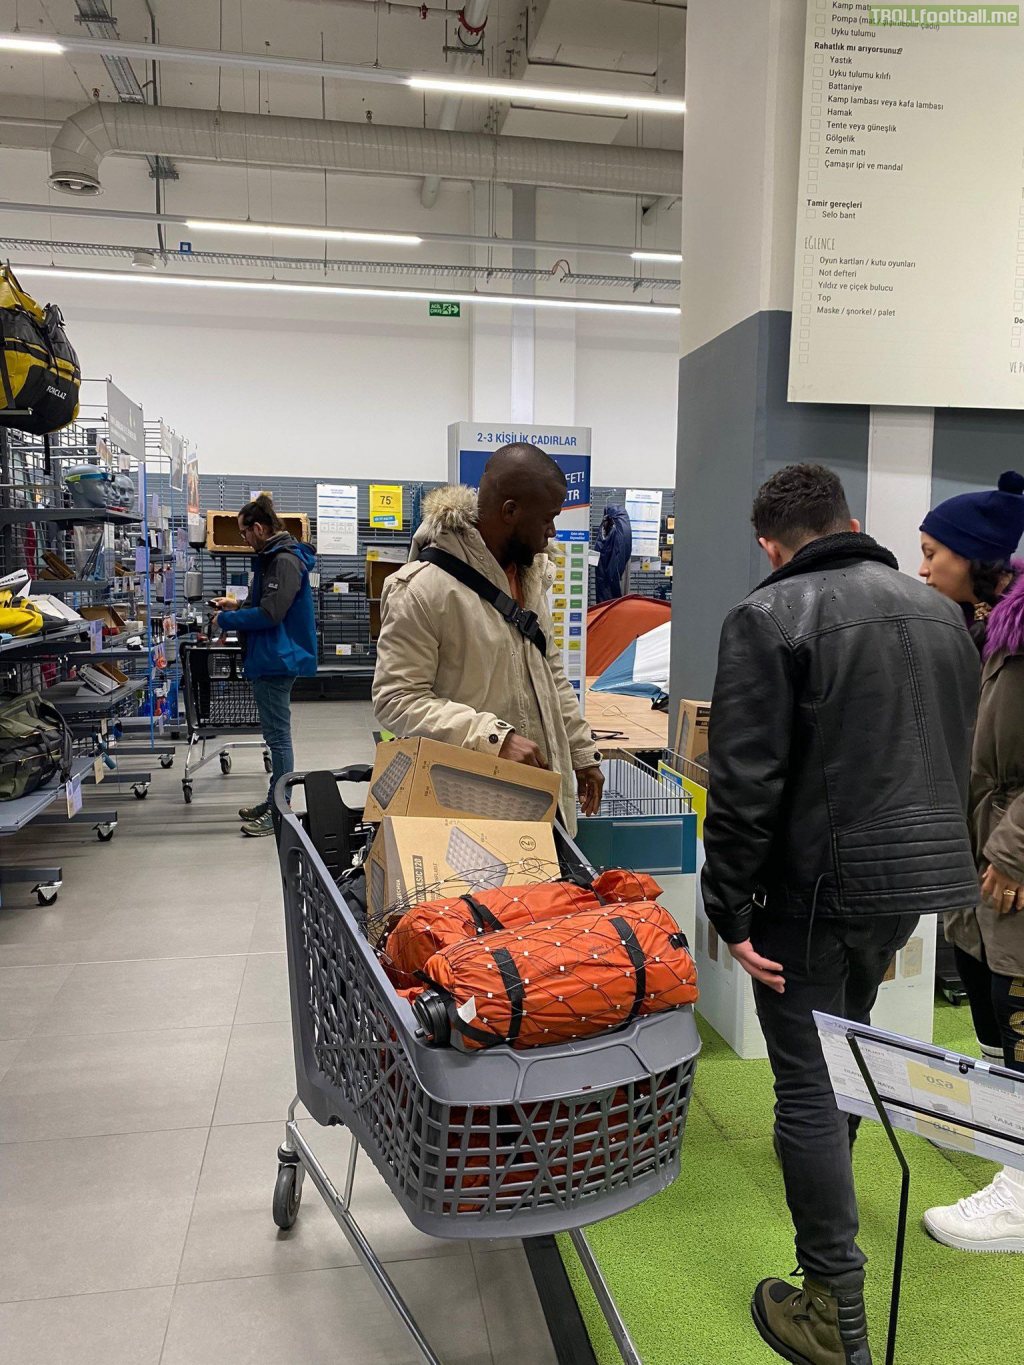 Enner Valencia (Fenerbahçe and Ecuador striker) was spotted buying relief supplies to help earthquake victims in Turkey.